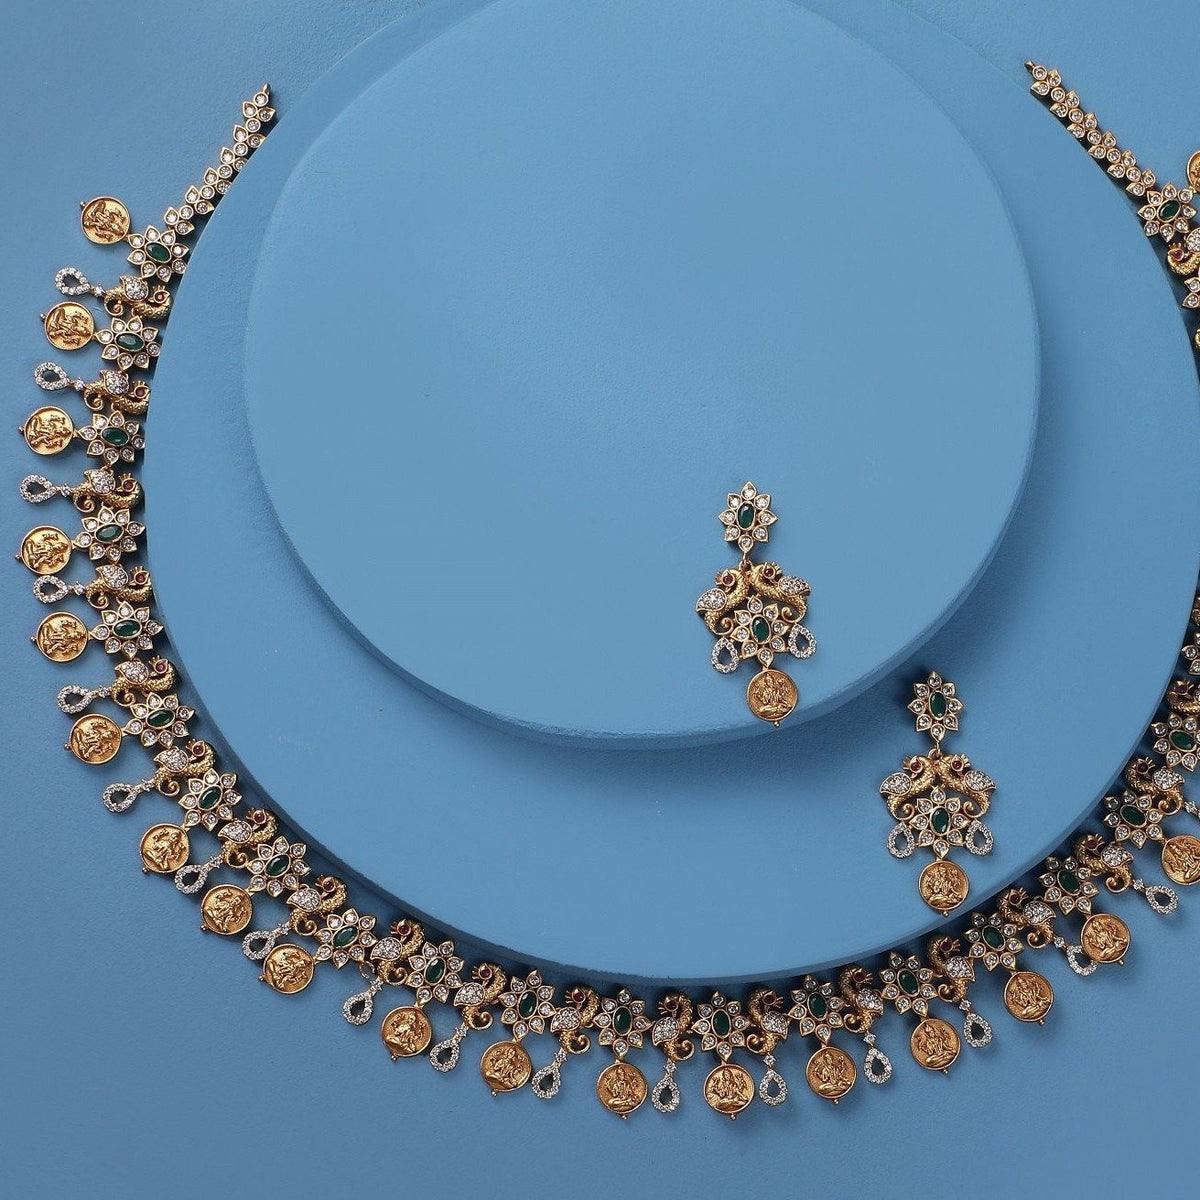 Antique Gold Plated Uzmi Long Necklace Earring Set